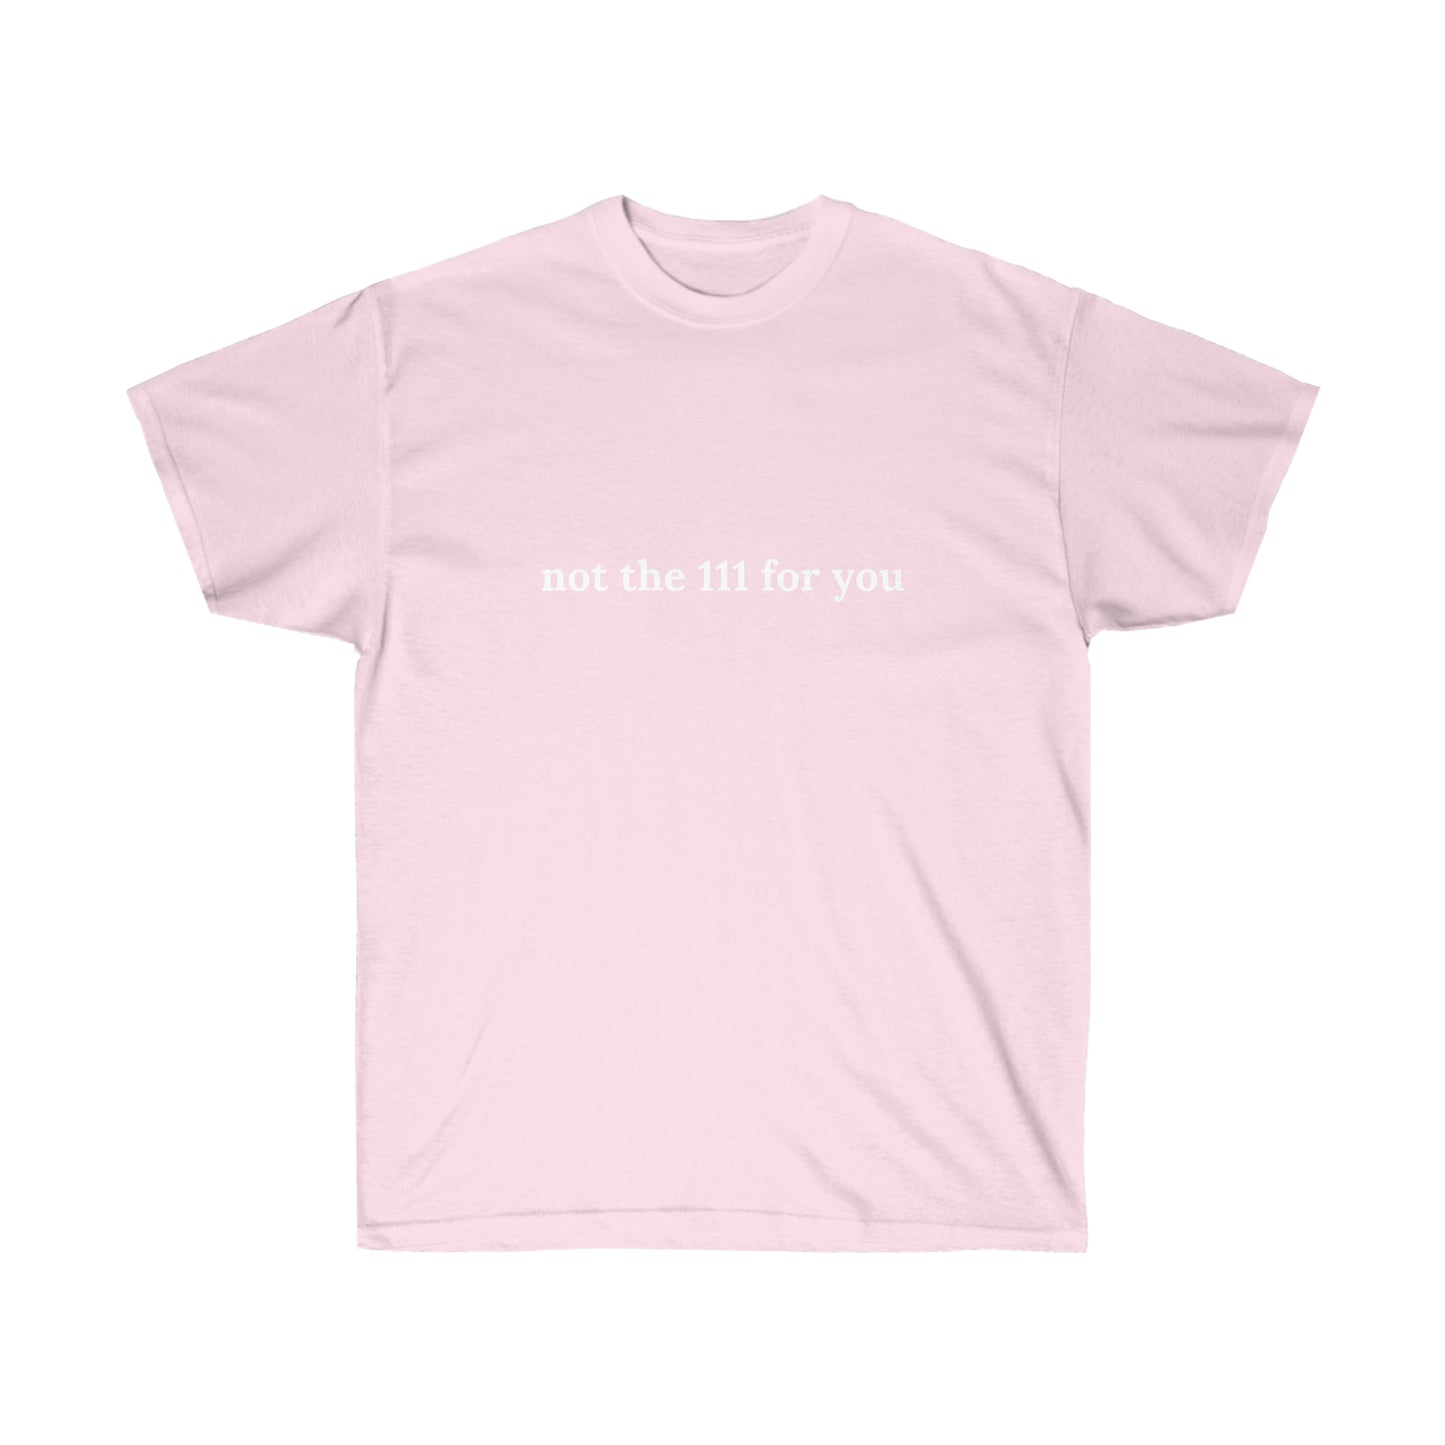 Not the 111 for u | tee